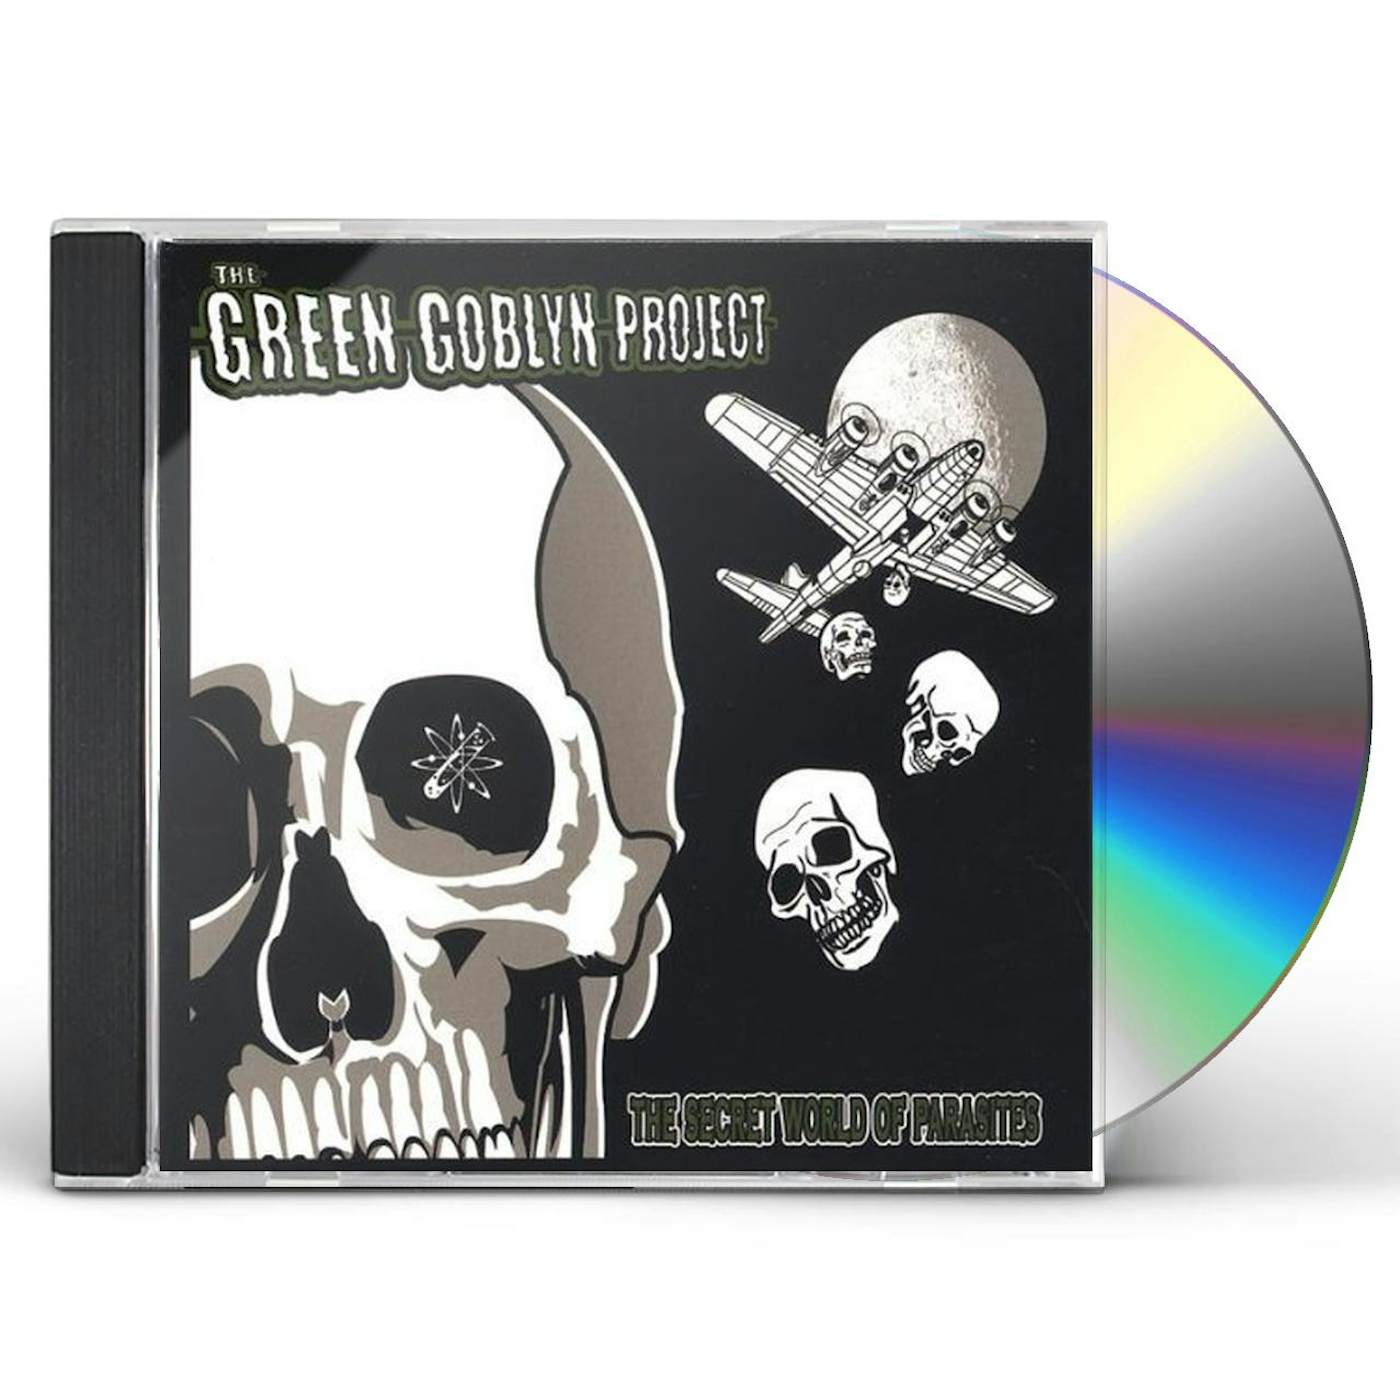 The Green Goblyn Project SECRET WORLD OF PARASITES CD